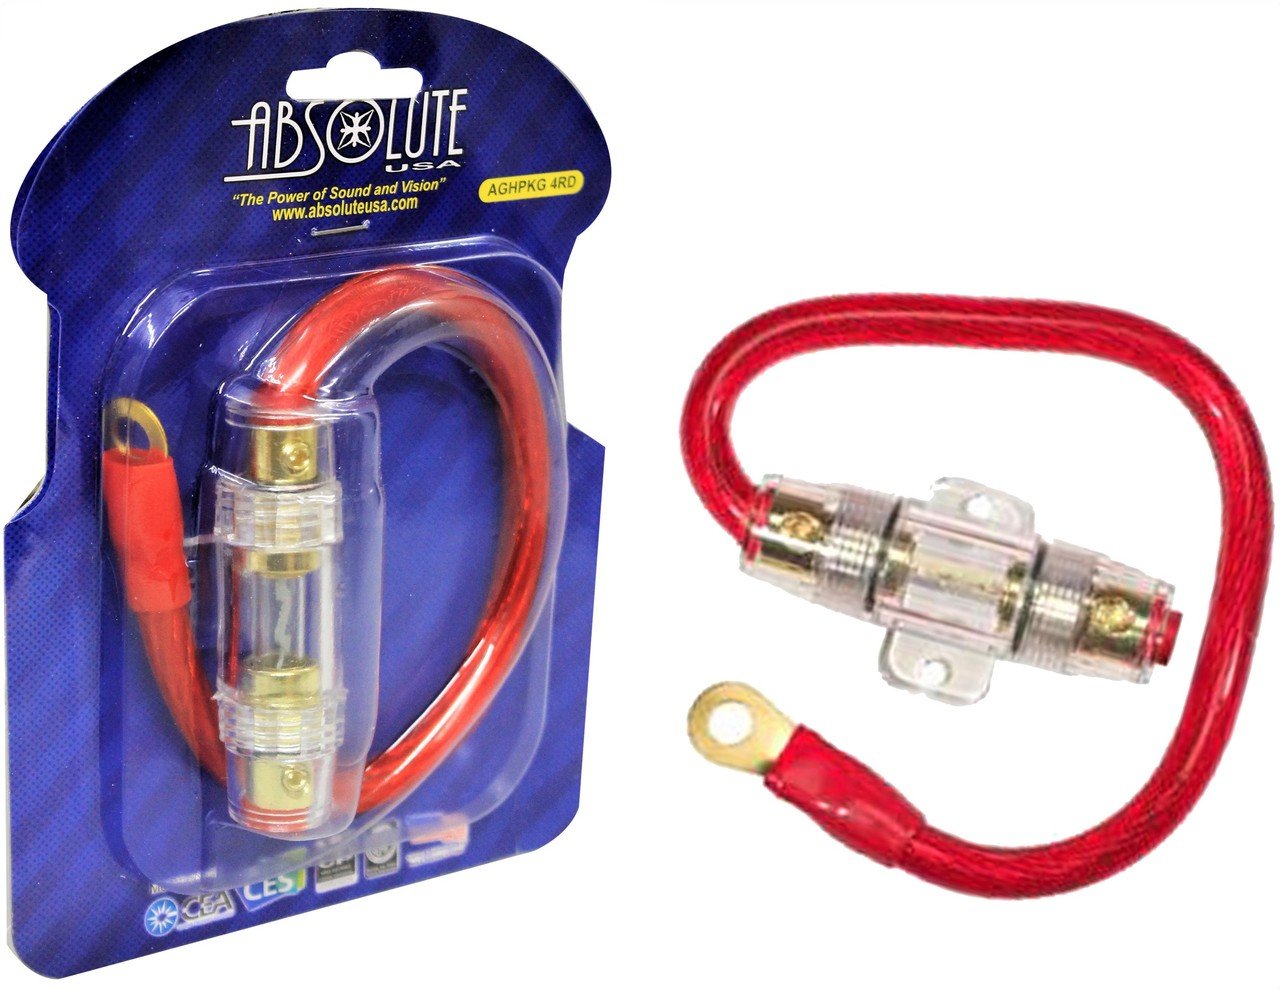 Absolute 4 Gauge RED Power Cable 100% With AGU Inline Fuse Holder 60a Fuse